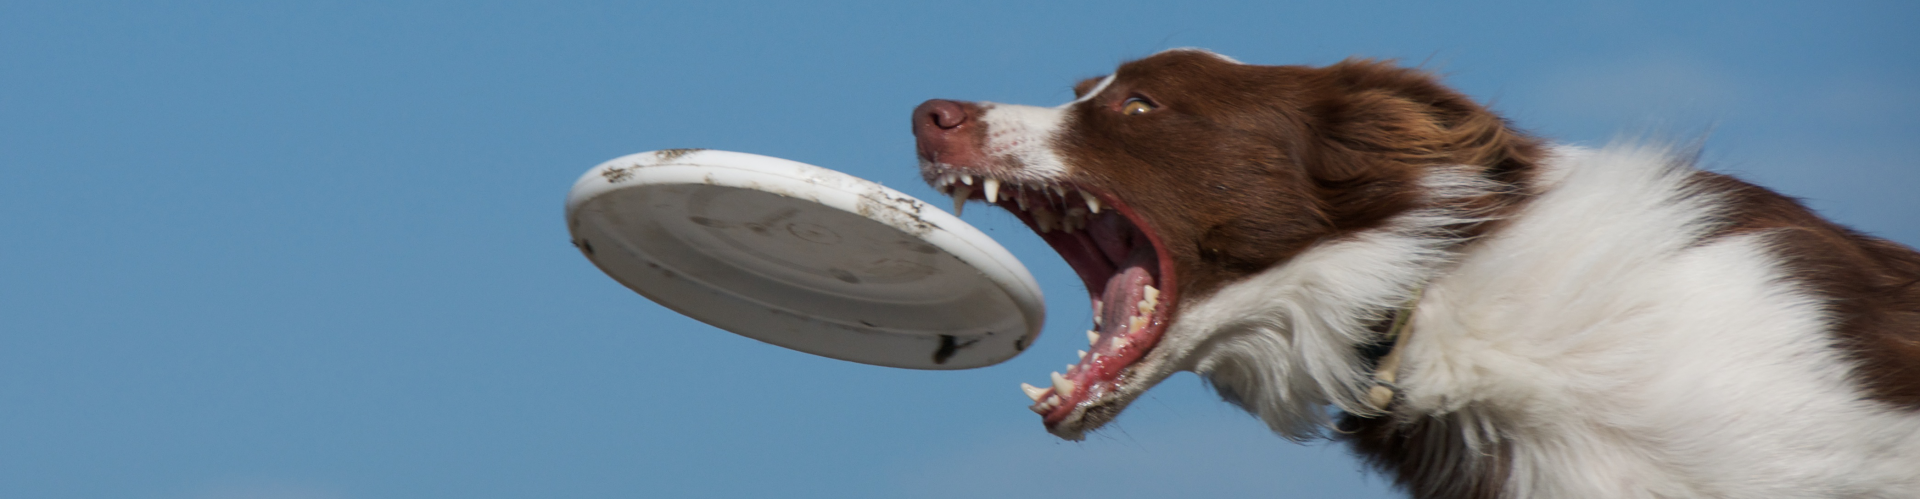 8 Qualified Teams Disc Dog World Championships